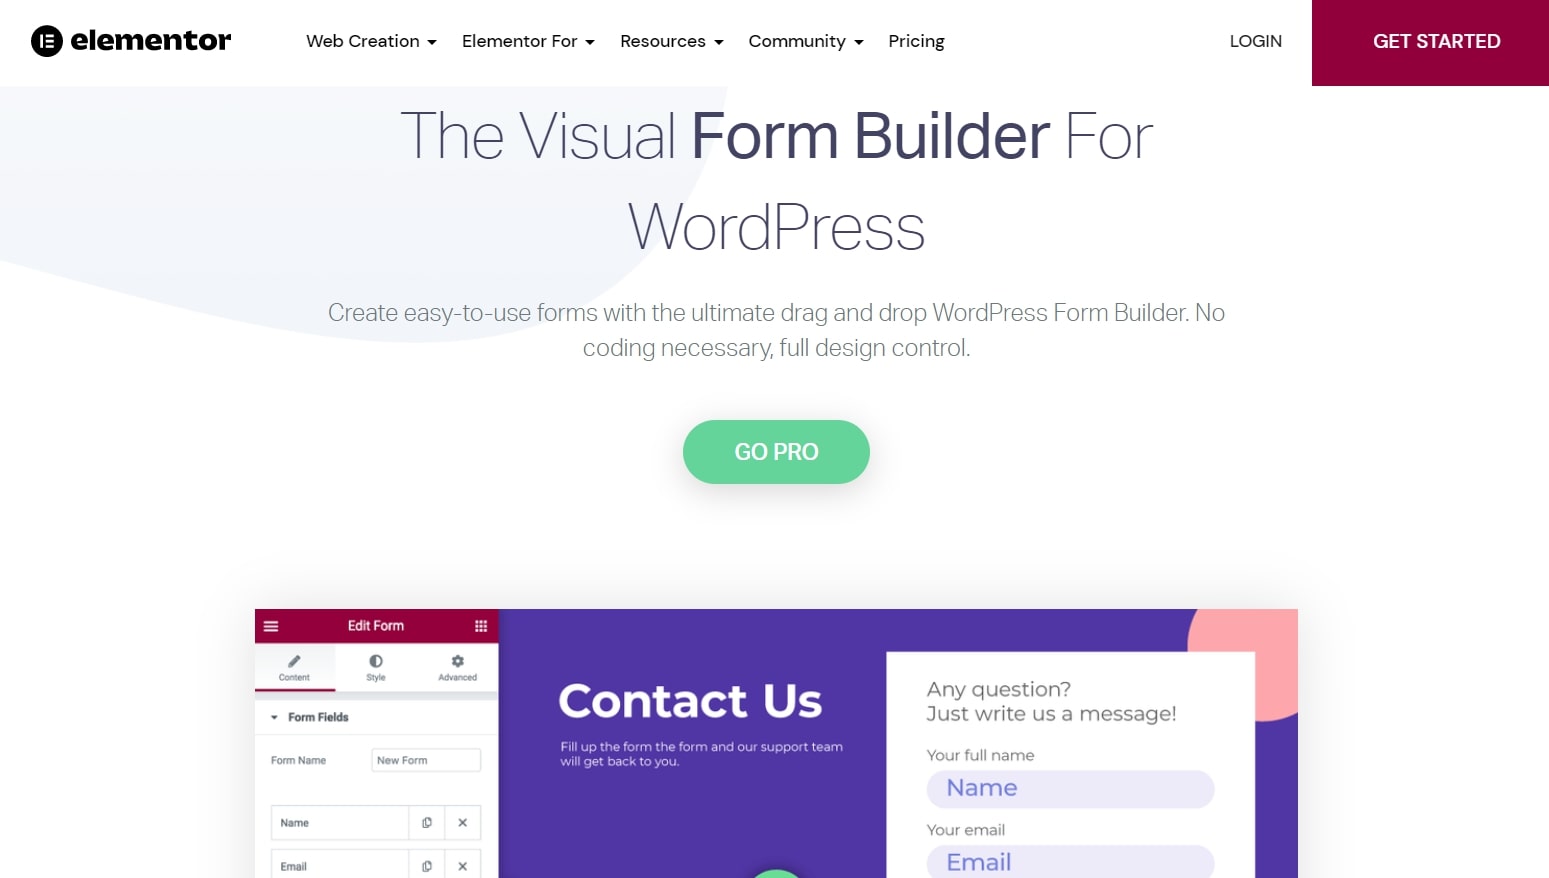 Elementor's webpage discussing its form builder